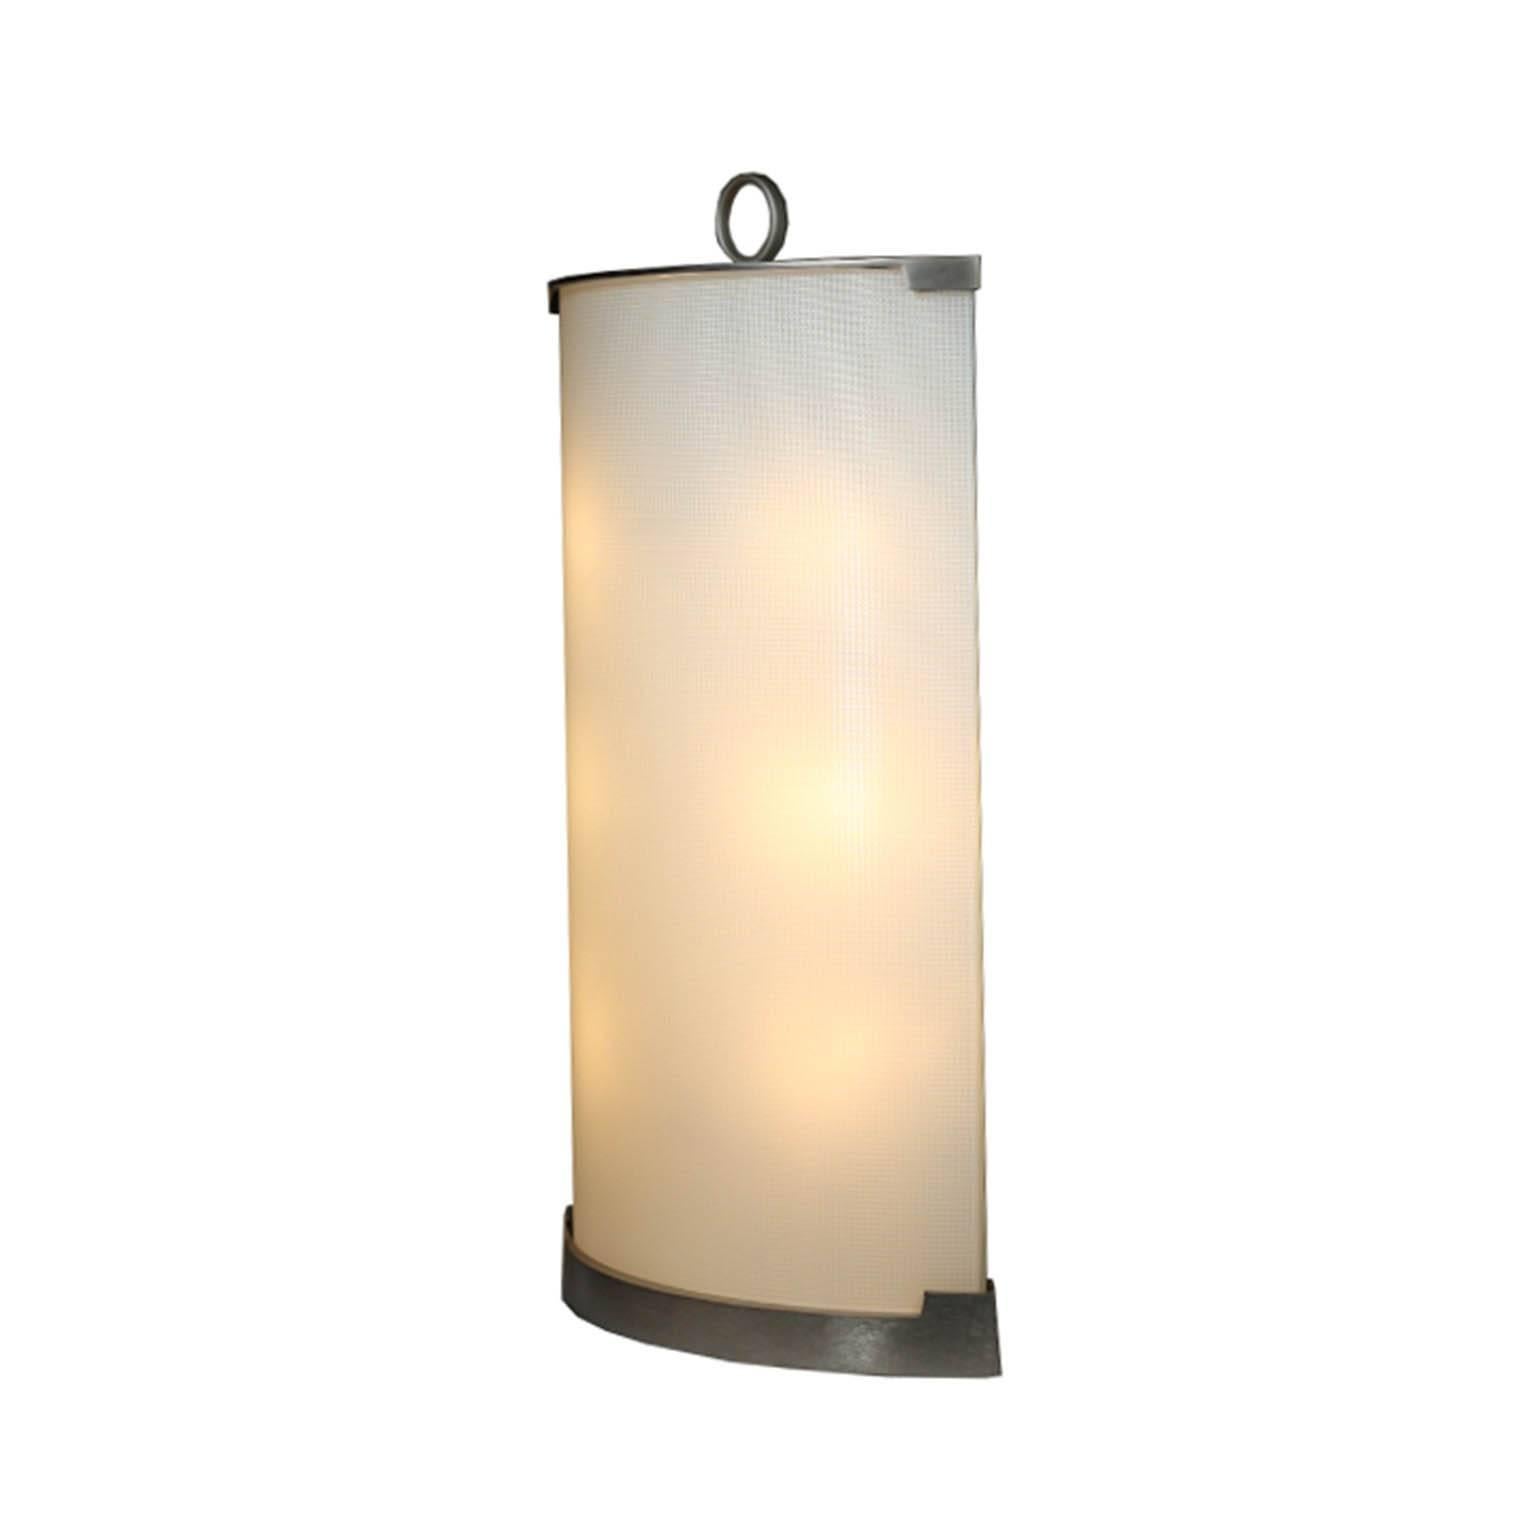 Brushed nickel top and base with textured glass by Fontana Arte. The lamp features a handle of top and six chandelier bulbs inside.